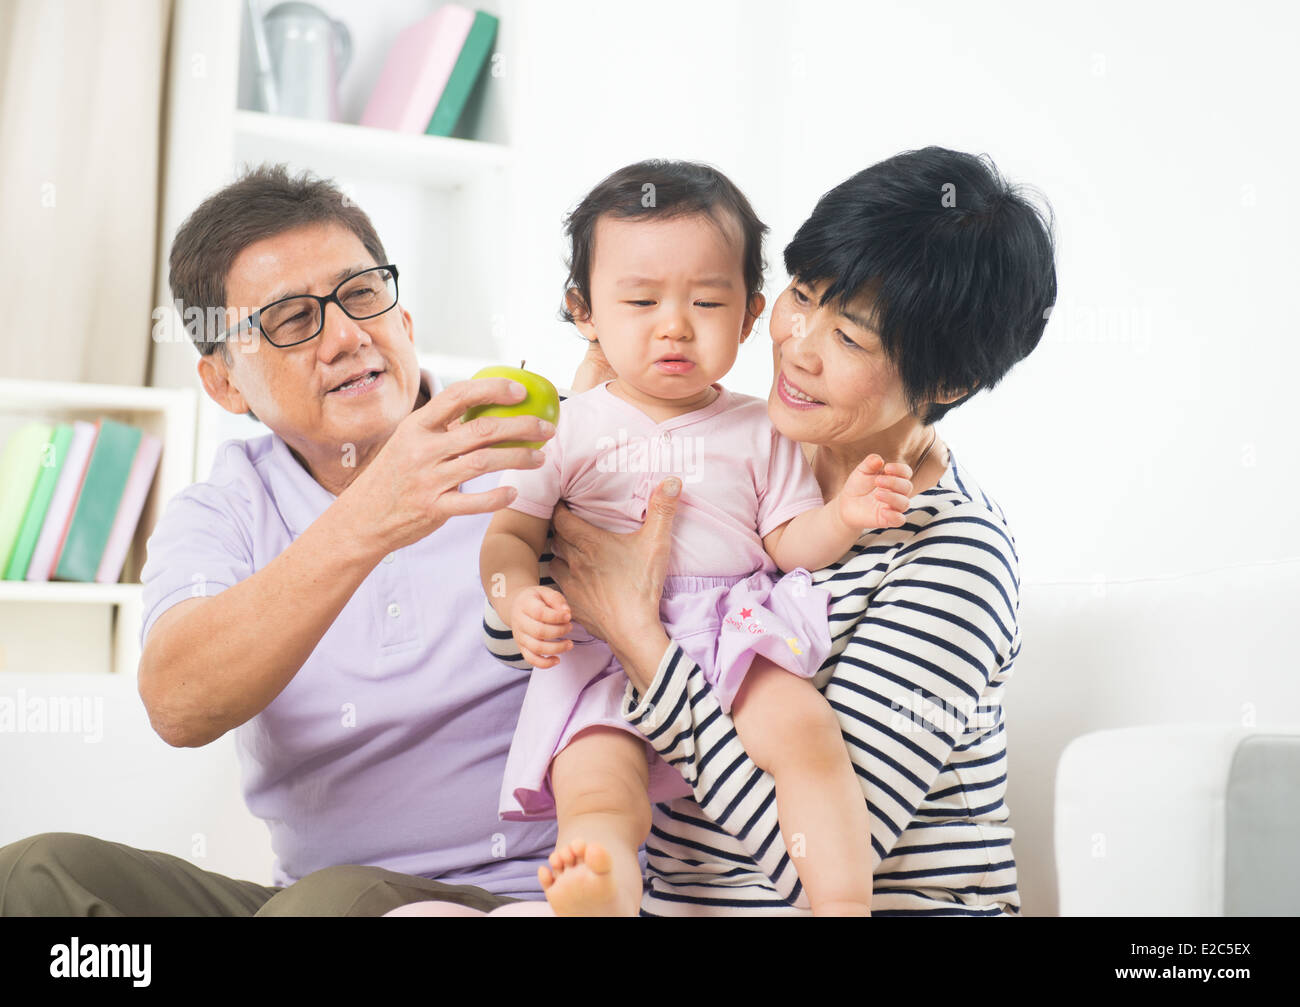 asian grand parents comforting their spoilt crying grand daugther Stock Photo